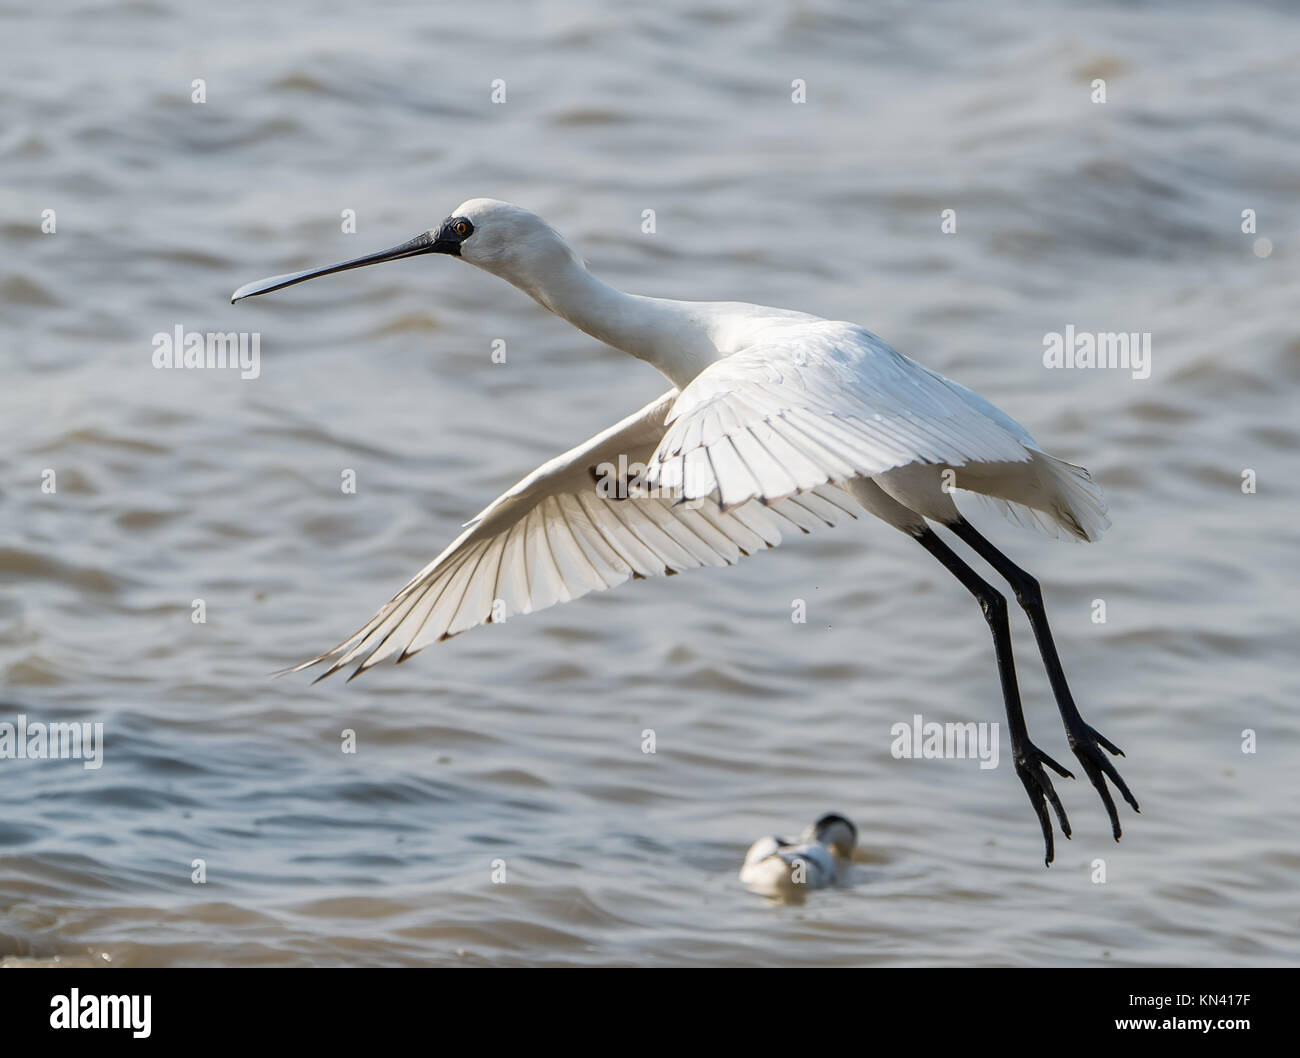 Black-faced Spoonbill in waterland Stock Photo